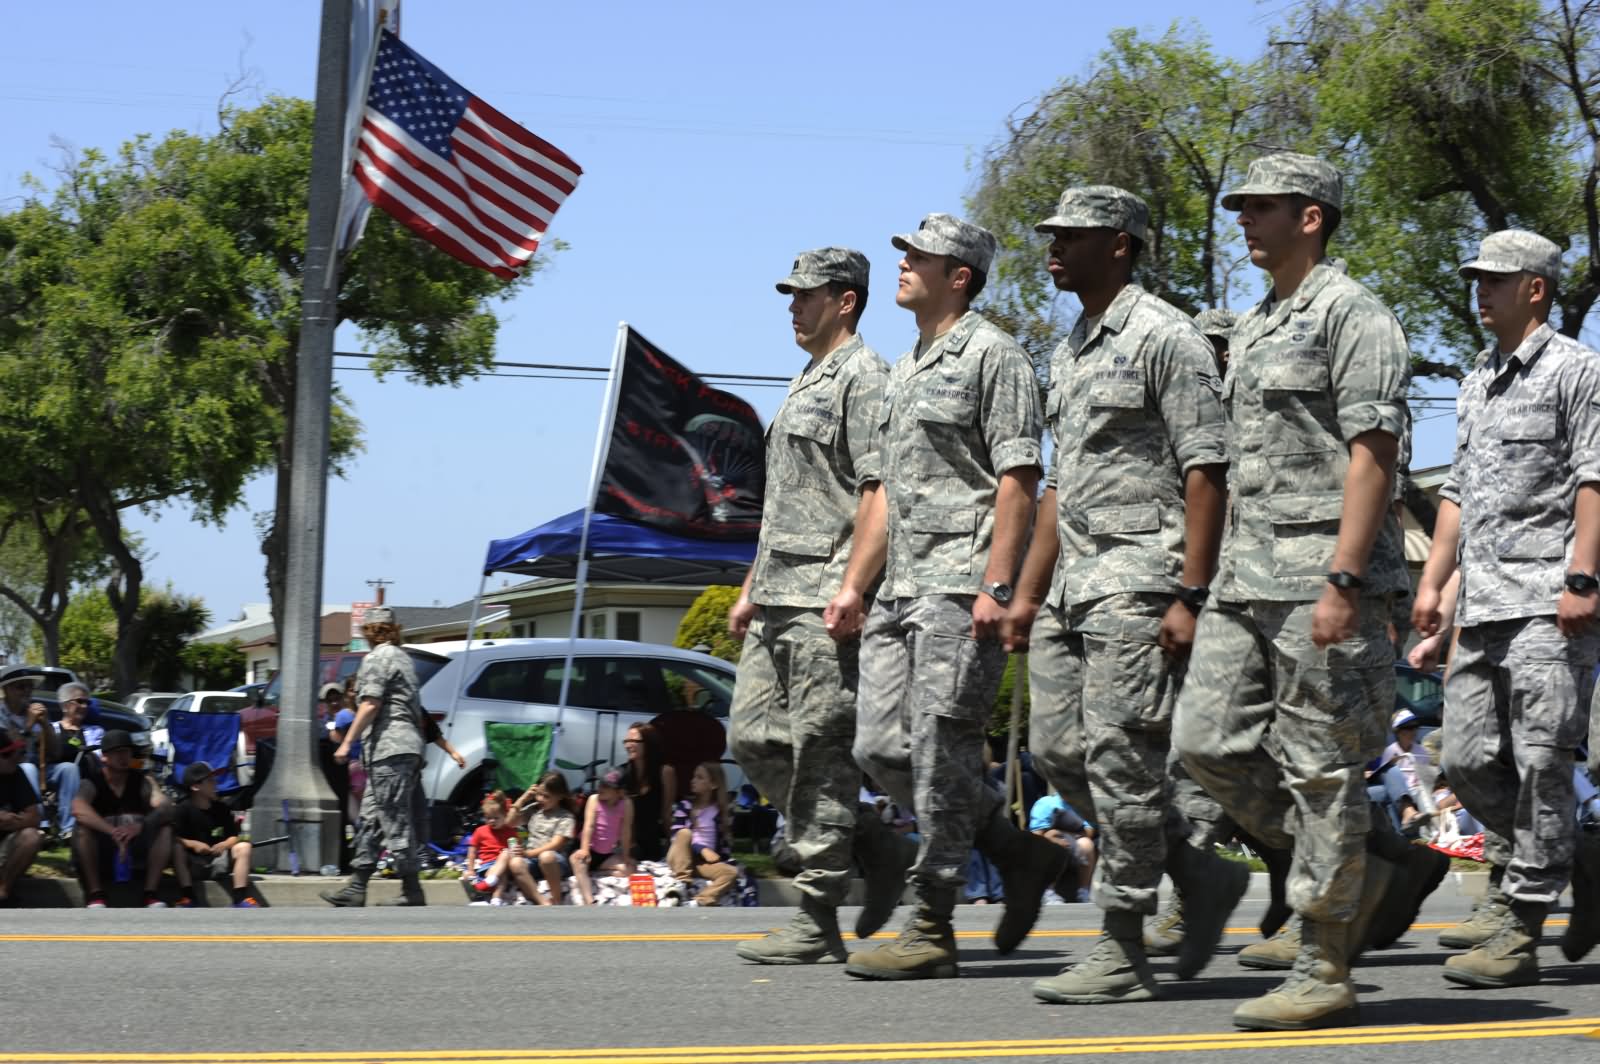 Army Men During Armed Forces Day Parade